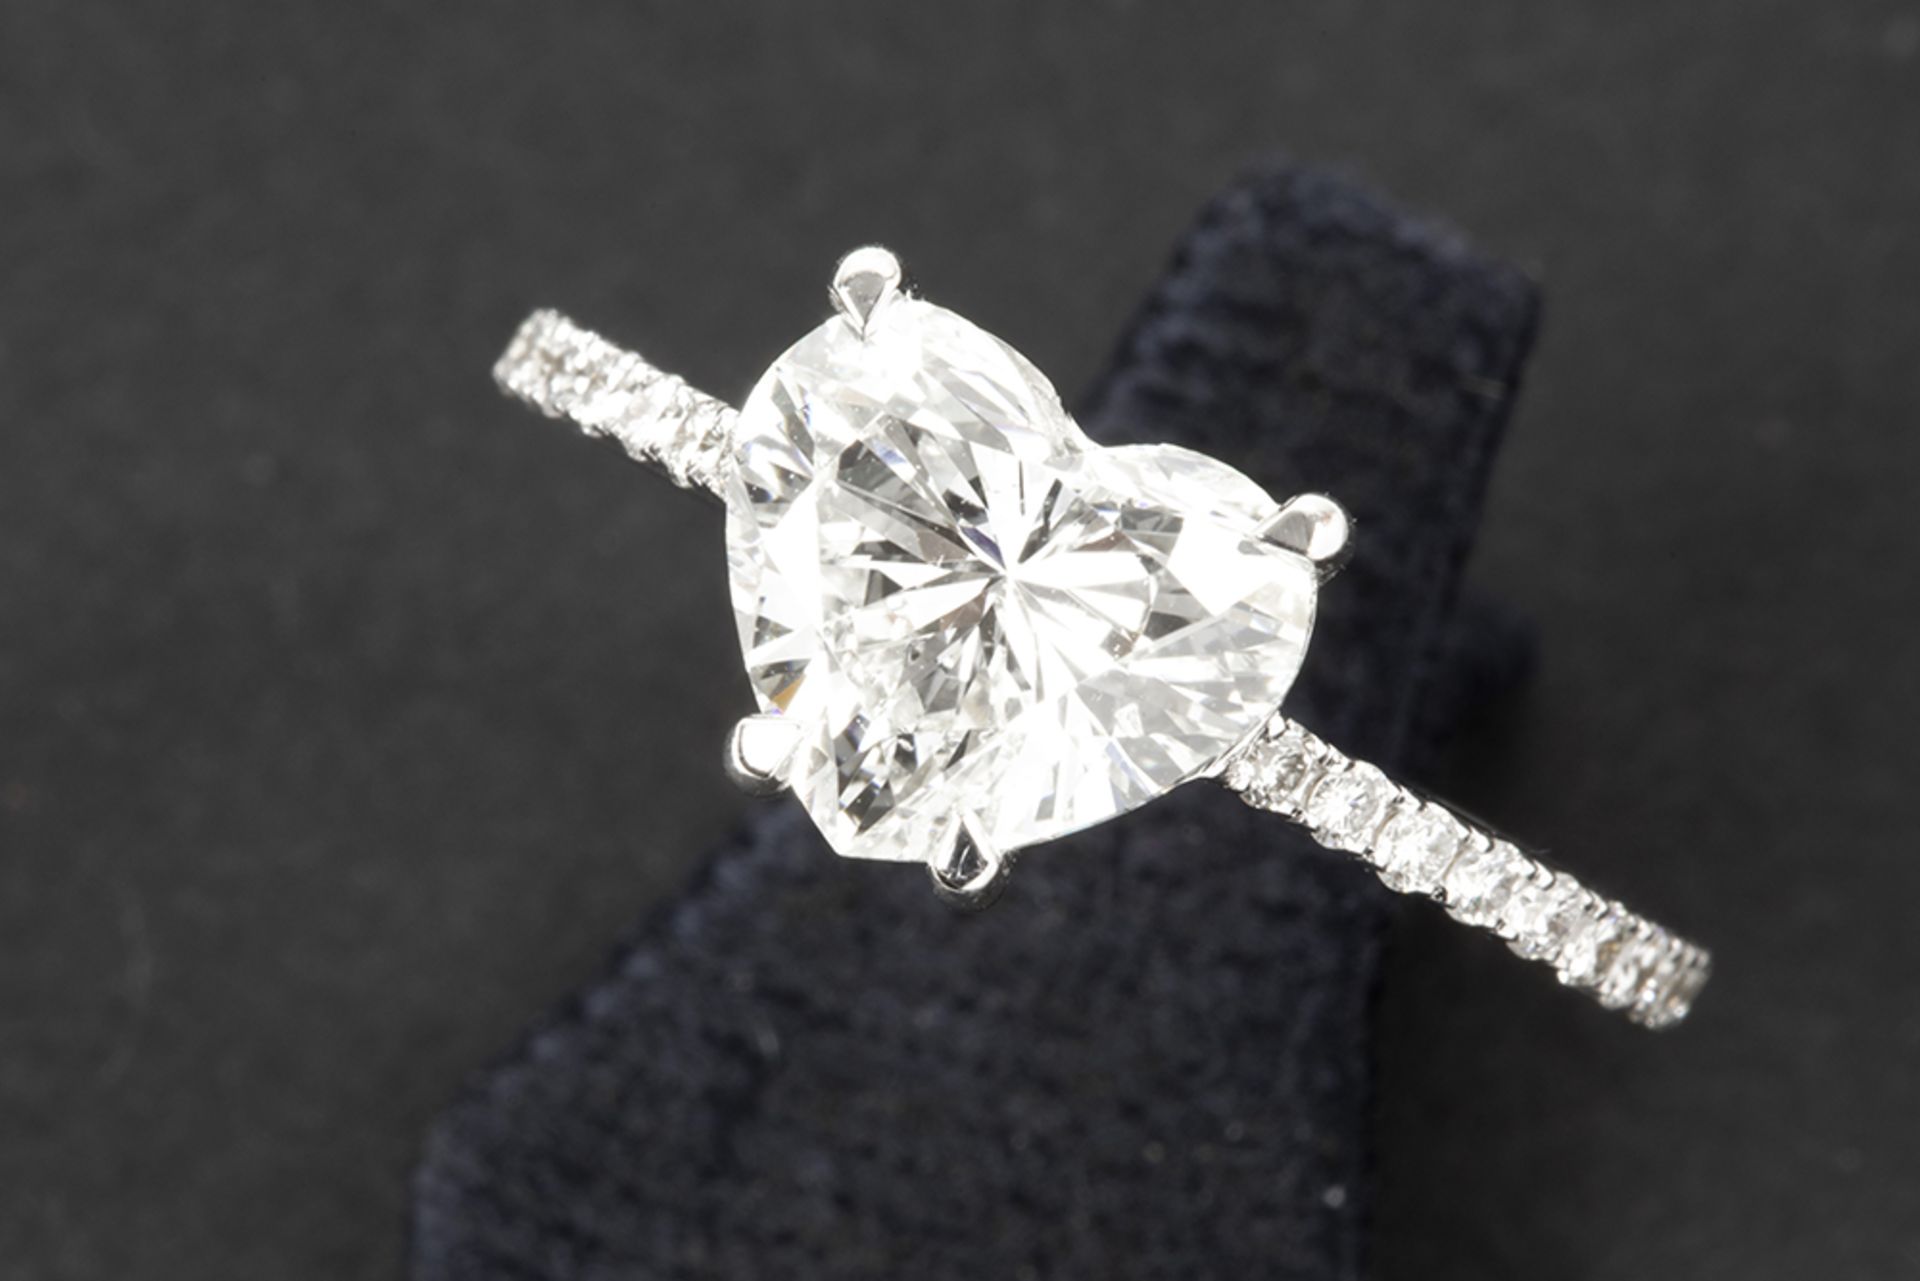 a 2,29 carat quality heartshaped brilliant cut diamond set in a ring in white gold (18 carat) with